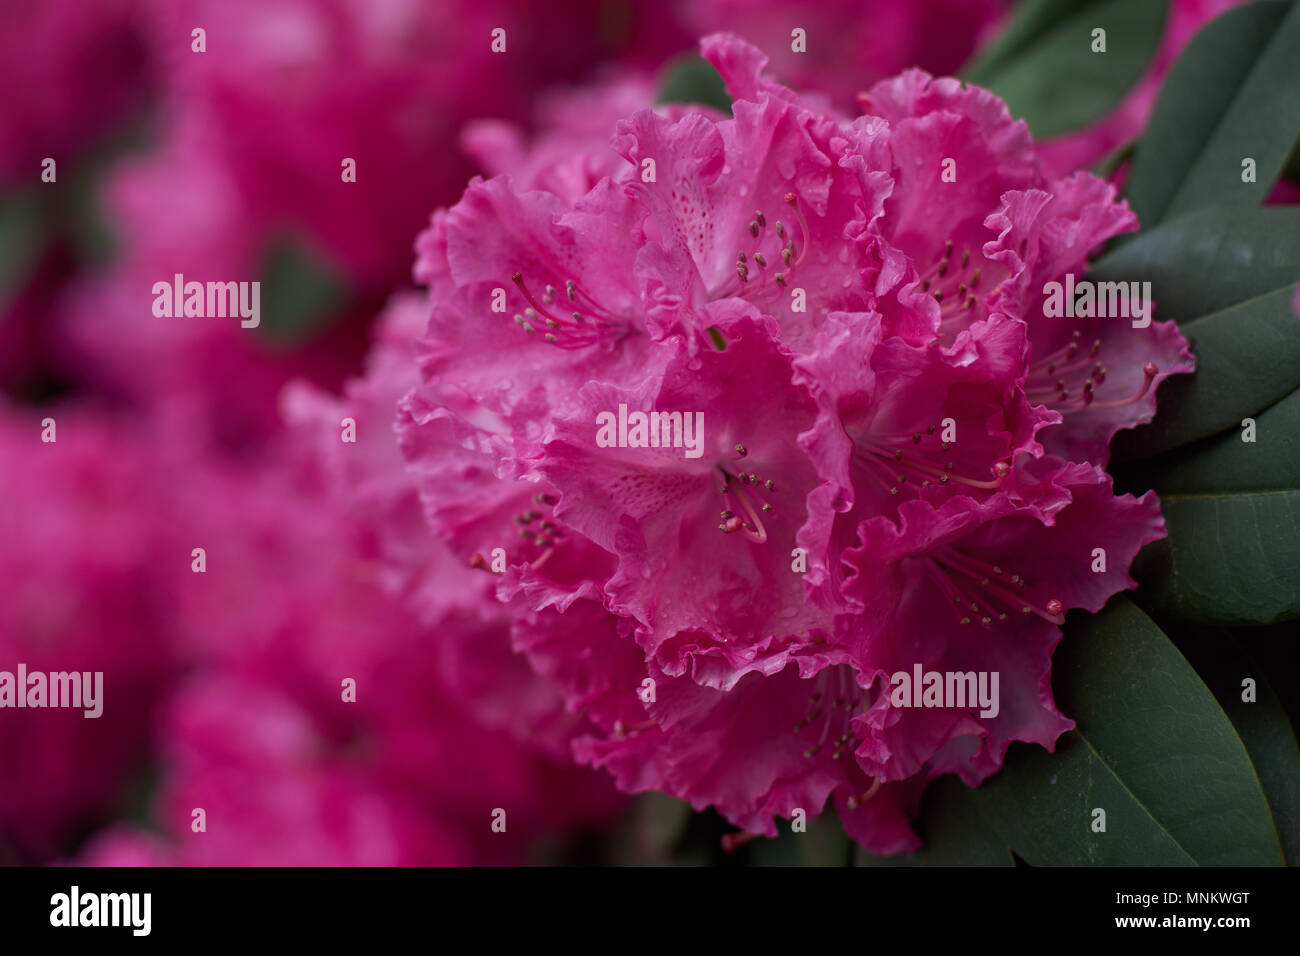 Rhododendron Germania pink purple blossom Lush rhododendron flowers close up Rhododendron blooming Rhododendron flowering spring Rhodendron blooms Stock Photo